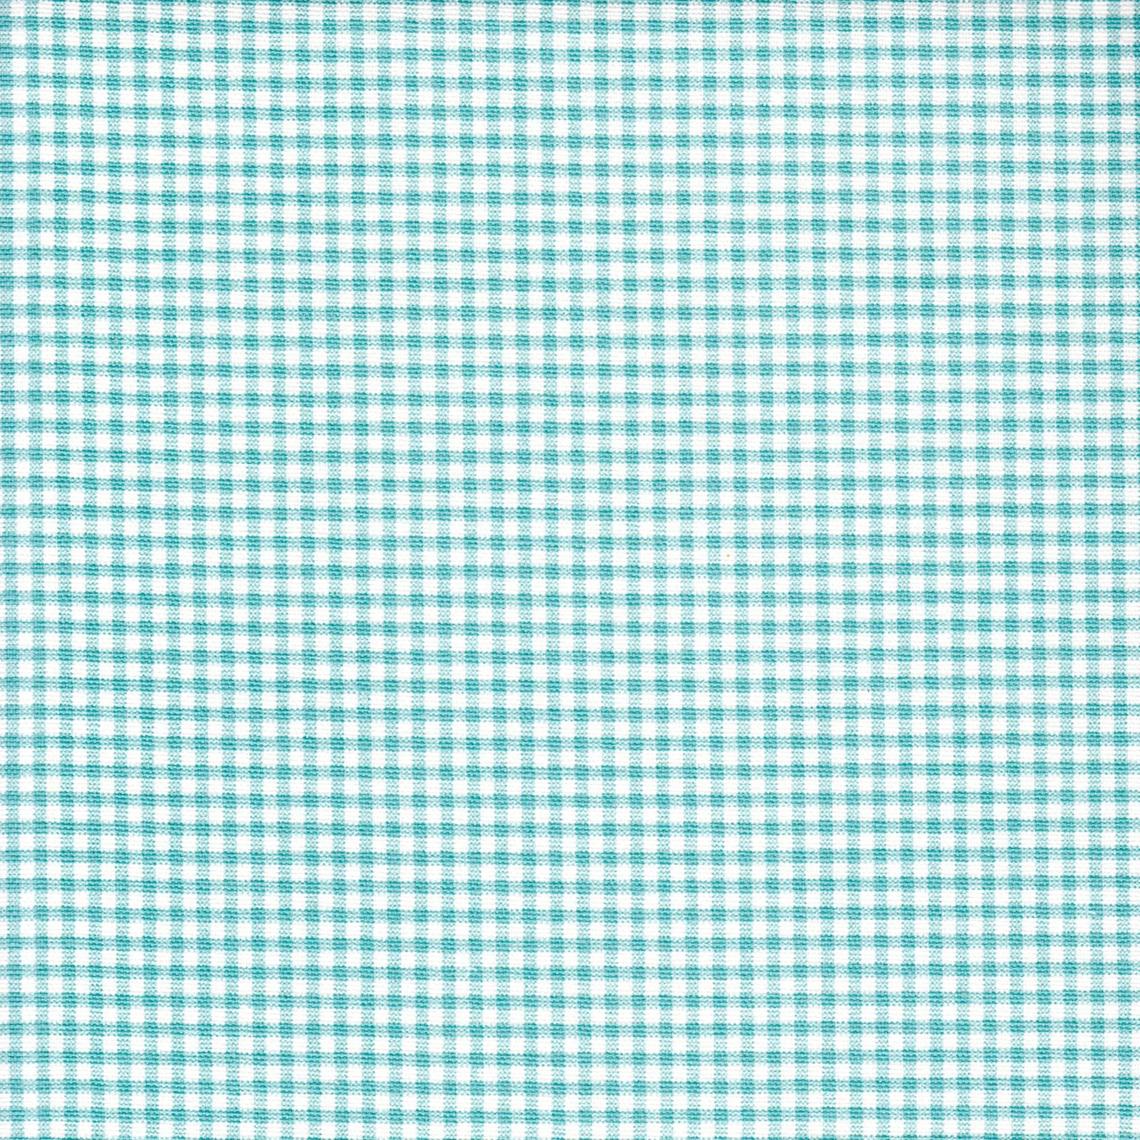 scalloped valance in farmhouse turquoise blue gingham check on cream